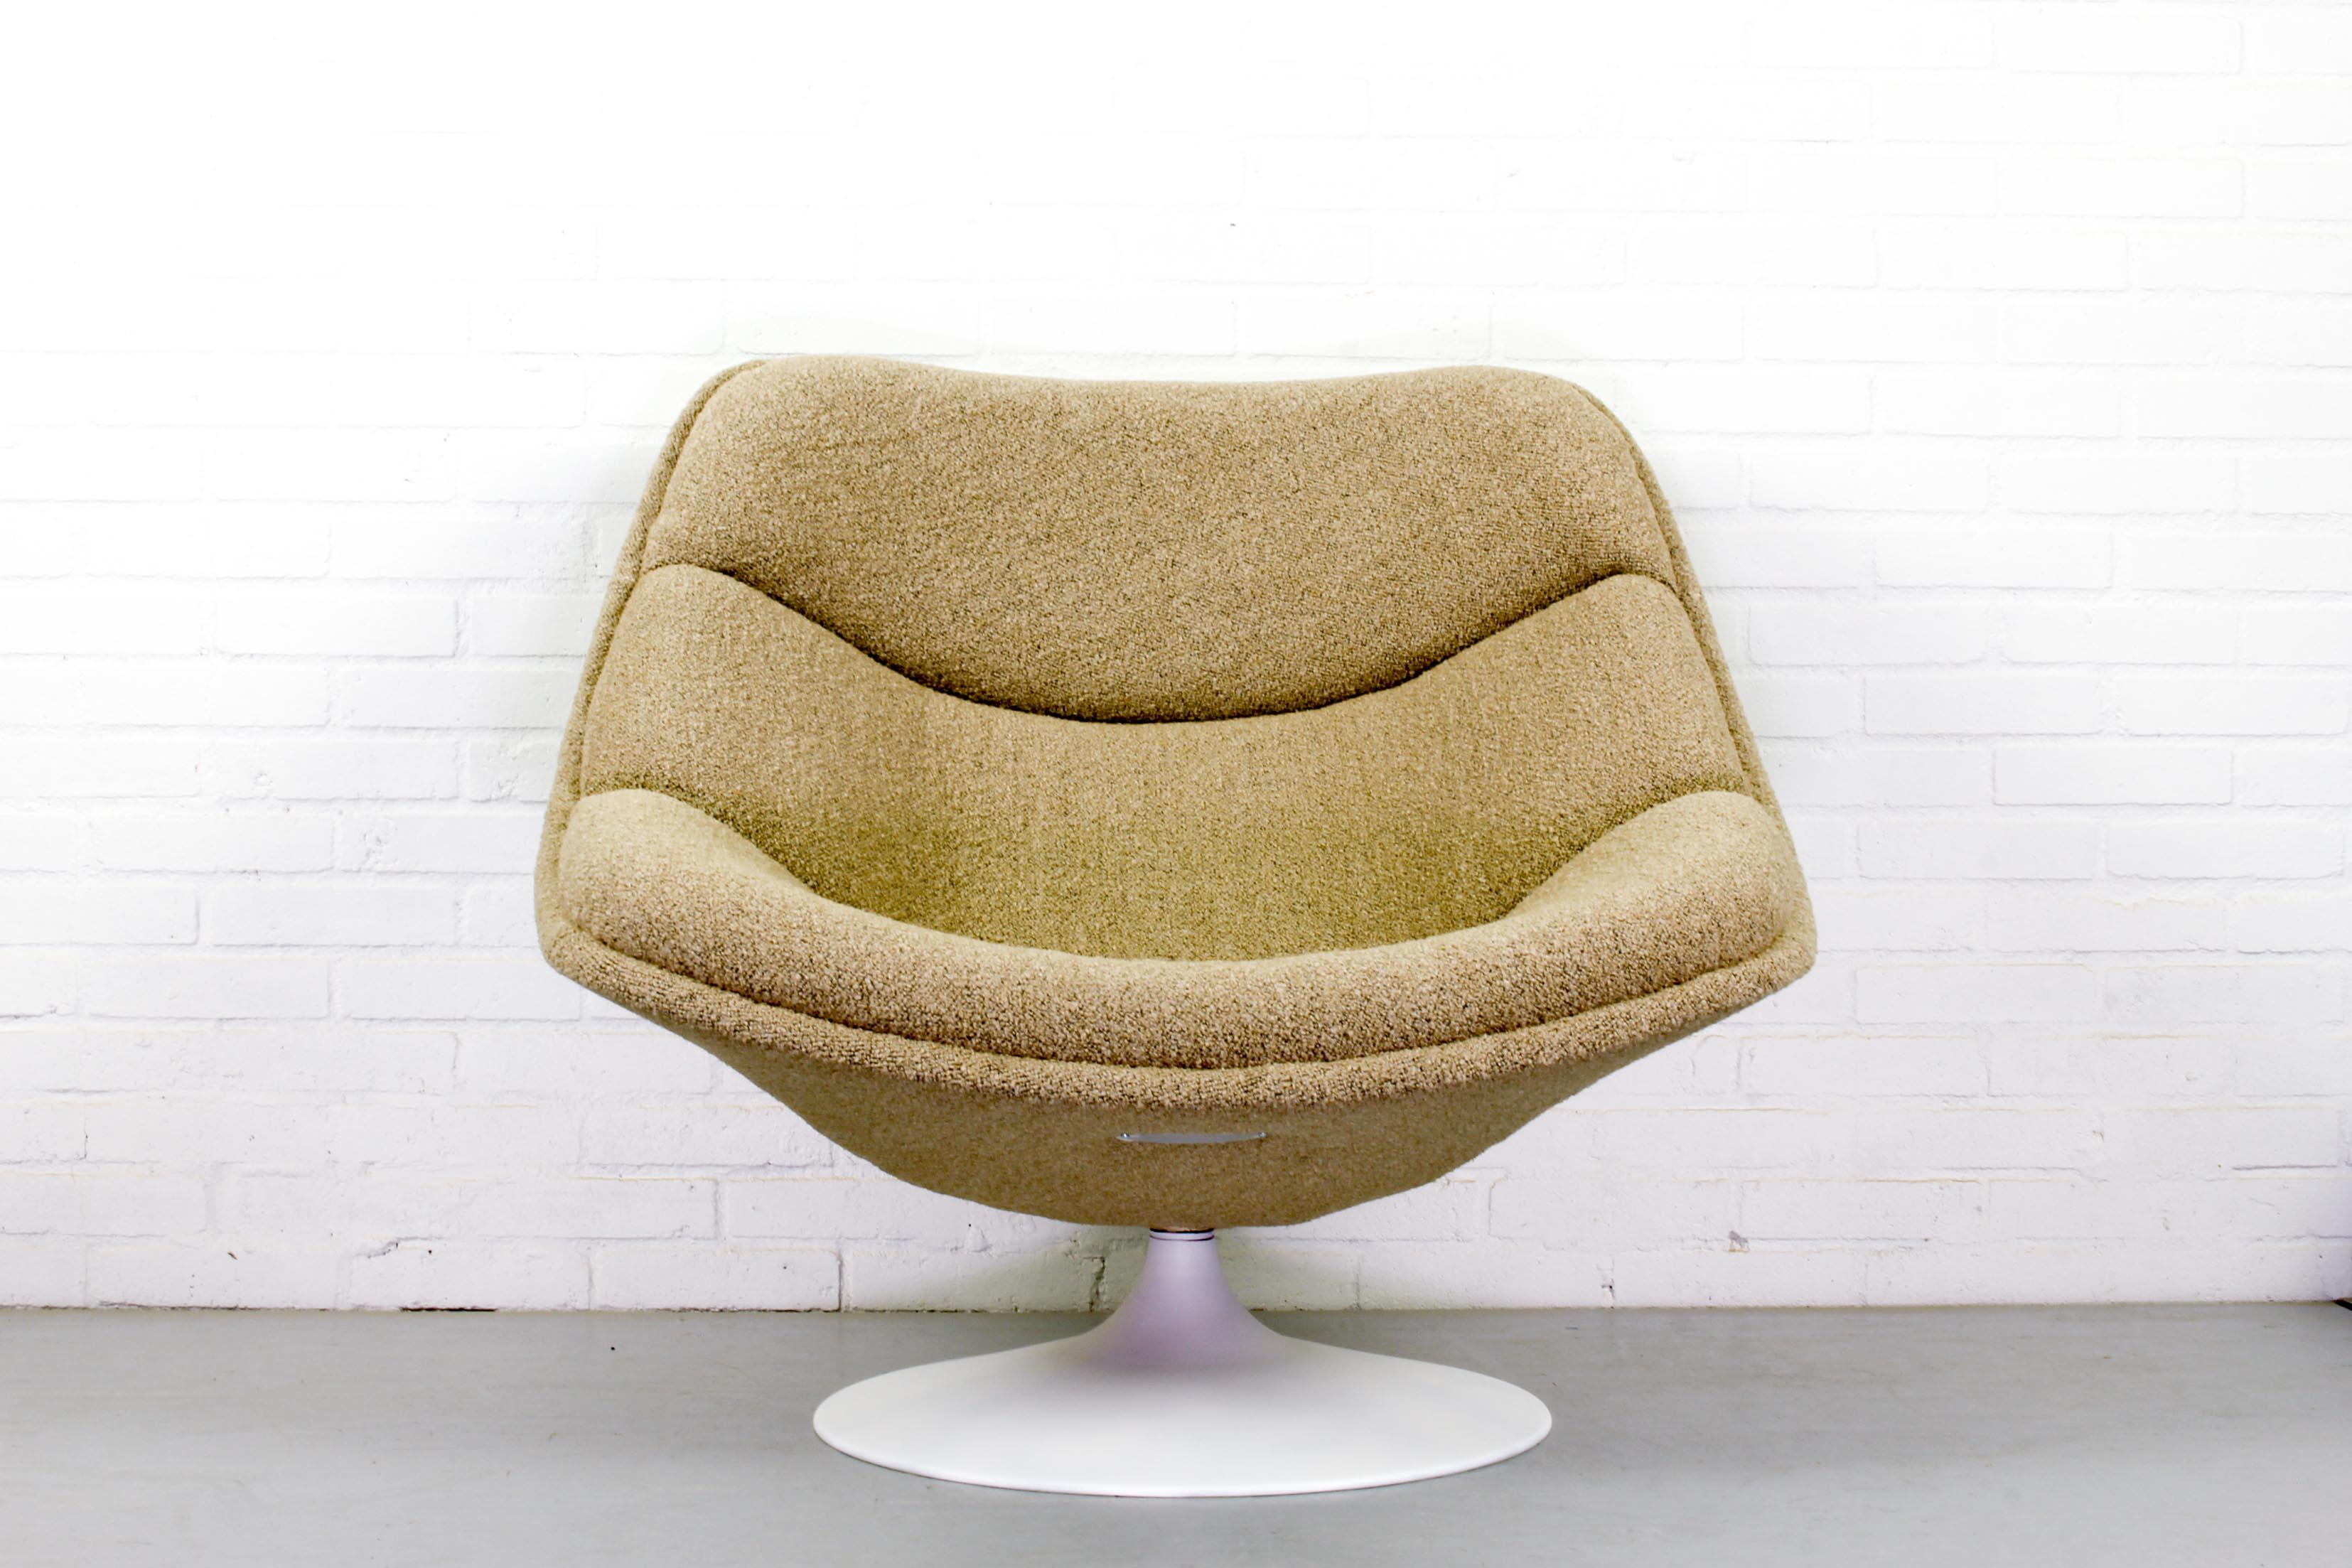 An original F557 swivel lounge chair by Pierre Paulin for Artifort, 1960s. This chair has a plastic base and is reupholstered in high quality bouclé fabric (Designtex Lambert color: Latte bouclé). Precursor of the globe chair, this chair is no